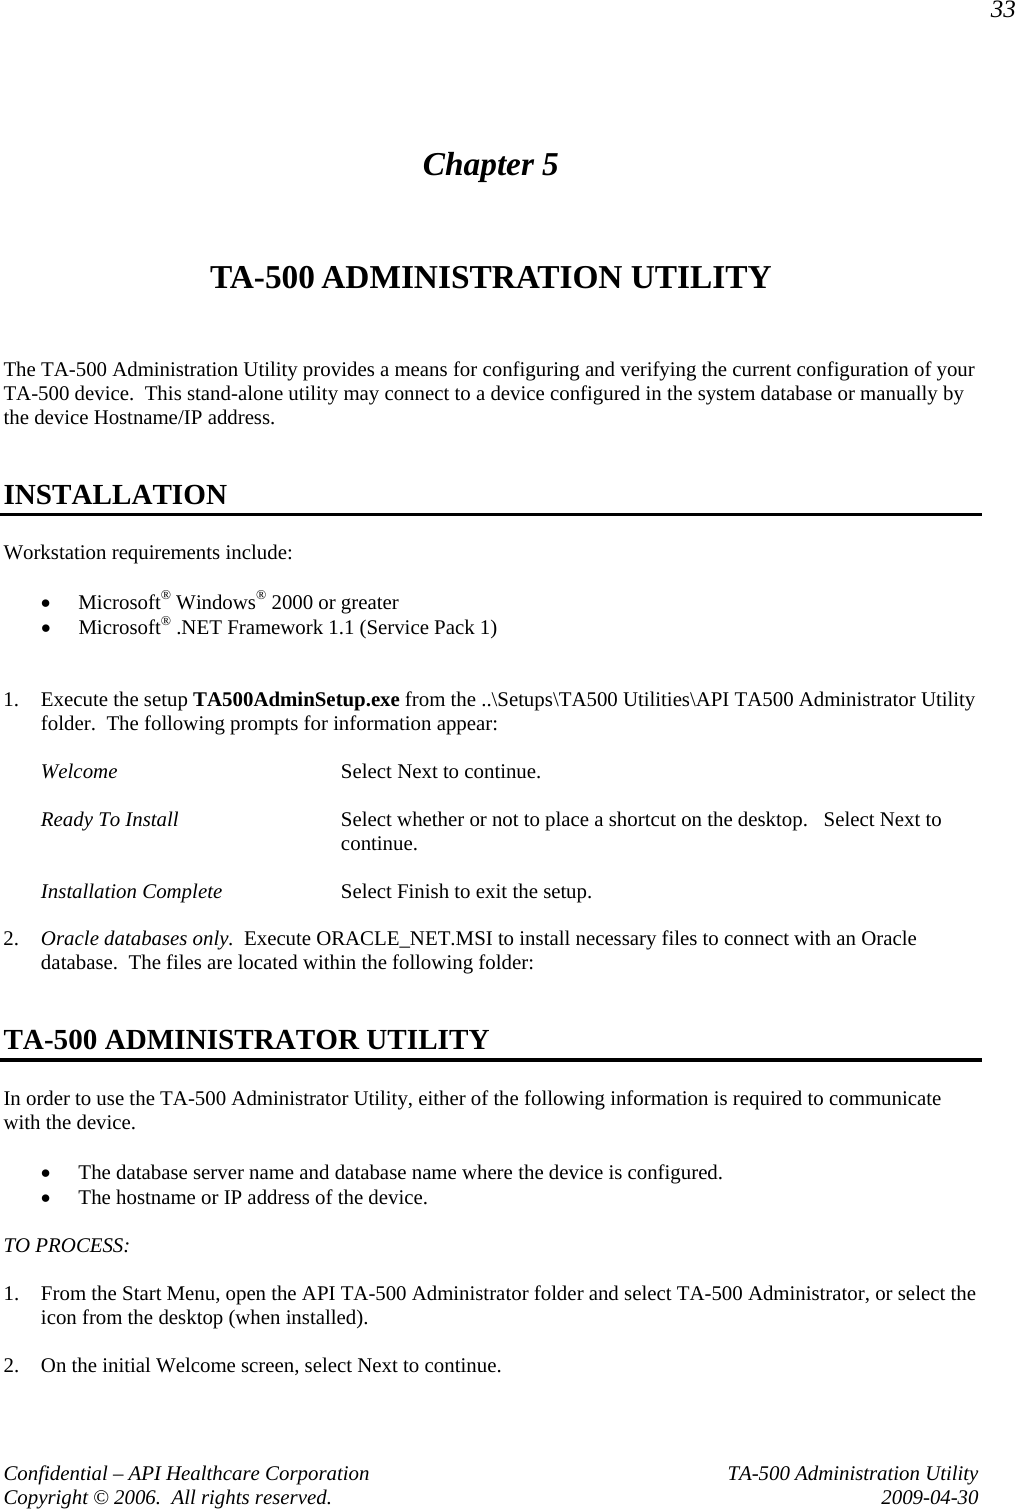 33 Confidential – API Healthcare Corporation  TA-500 Administration Utility Copyright © 2006.  All rights reserved.  2009-04-30 Chapter 5 TA-500 ADMINISTRATION UTILITY  The TA-500 Administration Utility provides a means for configuring and verifying the current configuration of your TA-500 device.  This stand-alone utility may connect to a device configured in the system database or manually by the device Hostname/IP address.    INSTALLATION Workstation requirements include:  • Microsoft® Windows® 2000 or greater • Microsoft® .NET Framework 1.1 (Service Pack 1)   1. Execute the setup TA500AdminSetup.exe from the ..\Setups\TA500 Utilities\API TA500 Administrator Utility folder.  The following prompts for information appear:  Welcome  Select Next to continue.  Ready To Install  Select whether or not to place a shortcut on the desktop.   Select Next to continue.  Installation Complete  Select Finish to exit the setup.  2. Oracle databases only.  Execute ORACLE_NET.MSI to install necessary files to connect with an Oracle database.  The files are located within the following folder:   TA-500 ADMINISTRATOR UTILITY In order to use the TA-500 Administrator Utility, either of the following information is required to communicate with the device.  • The database server name and database name where the device is configured. • The hostname or IP address of the device.  TO PROCESS:  1. From the Start Menu, open the API TA-500 Administrator folder and select TA-500 Administrator, or select the icon from the desktop (when installed).  2. On the initial Welcome screen, select Next to continue.  